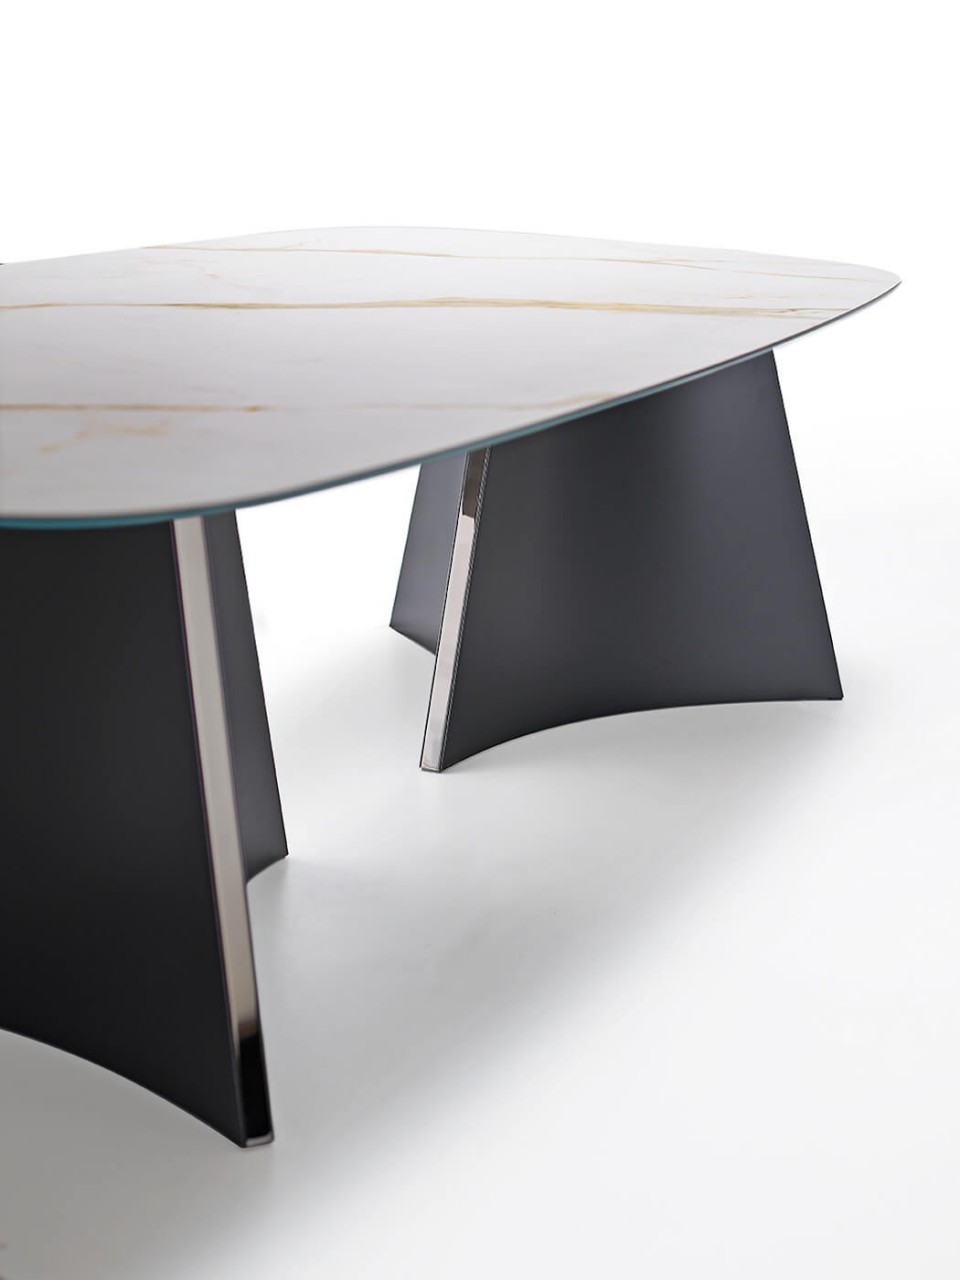 Barrel verison of Concave table with black metal structure et crystalceramic top